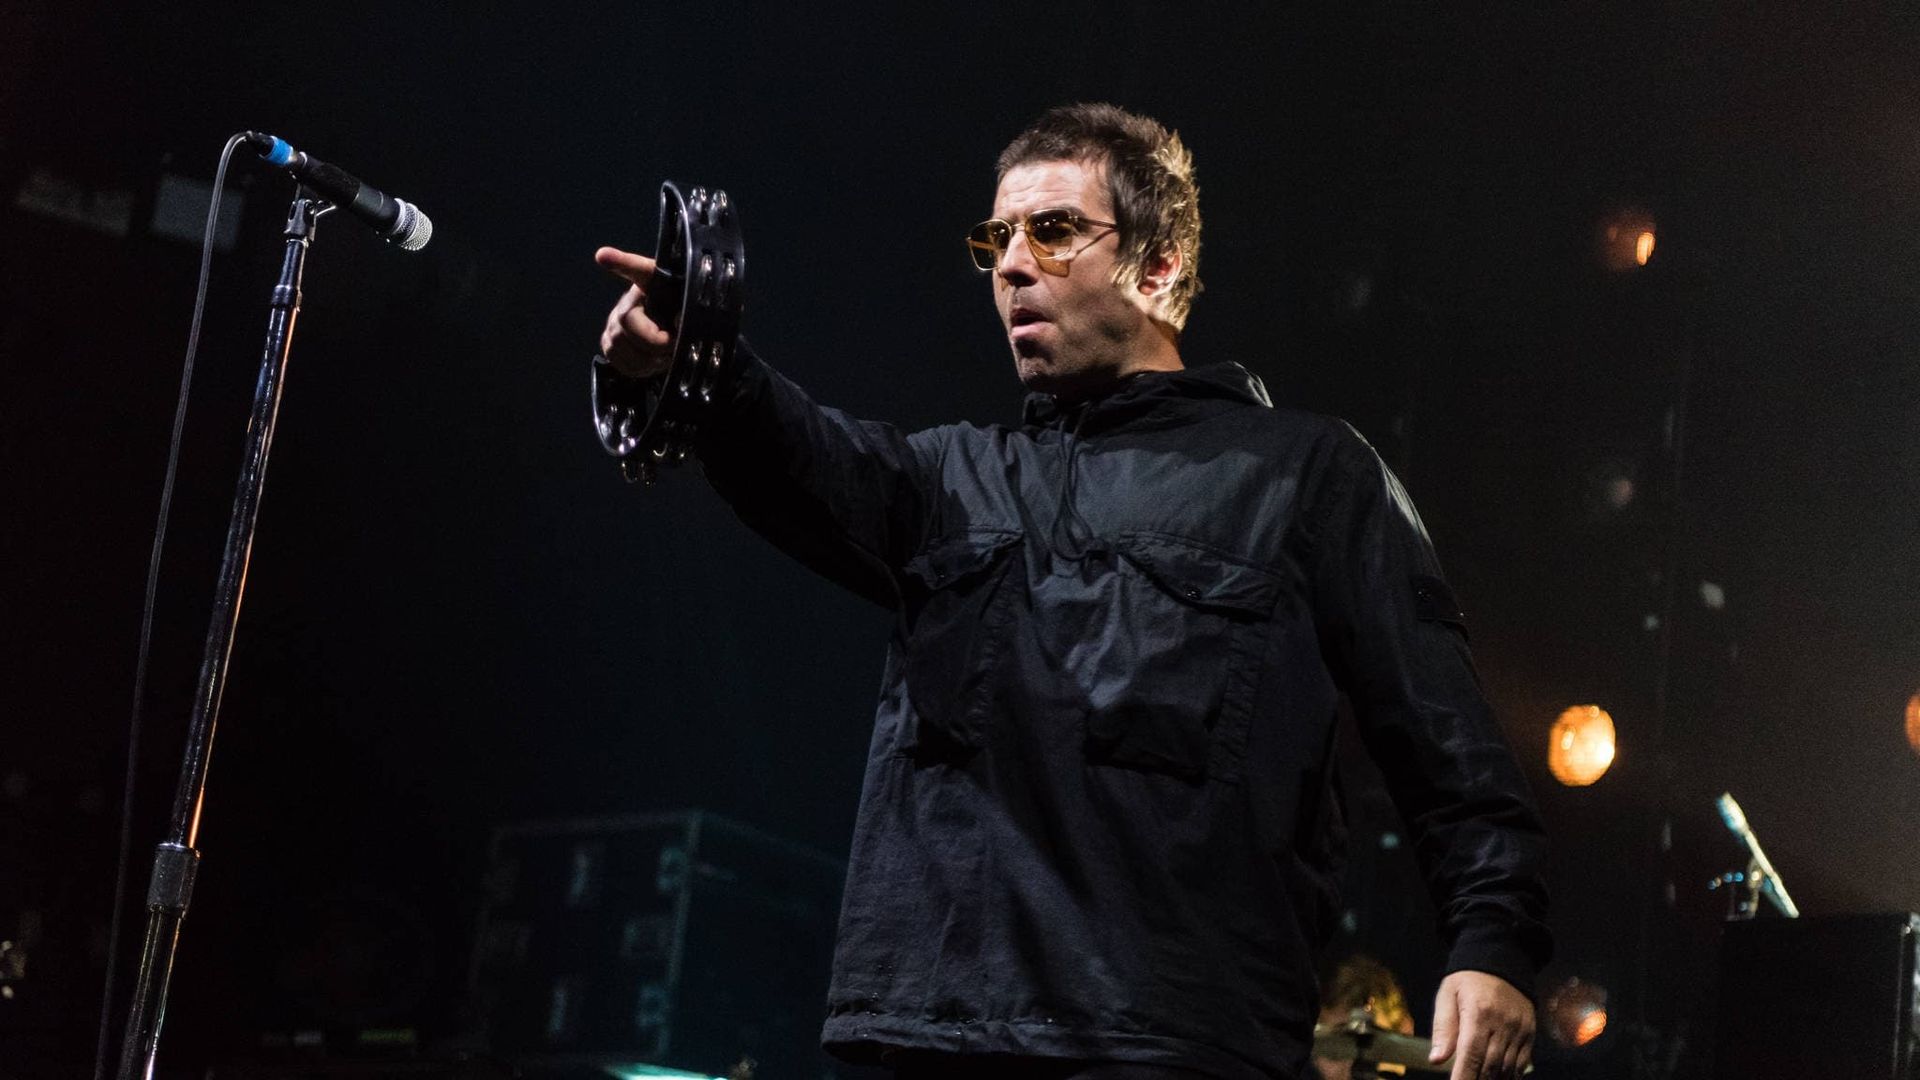 Liam Gallagher: Live from Manchester's Ritz background